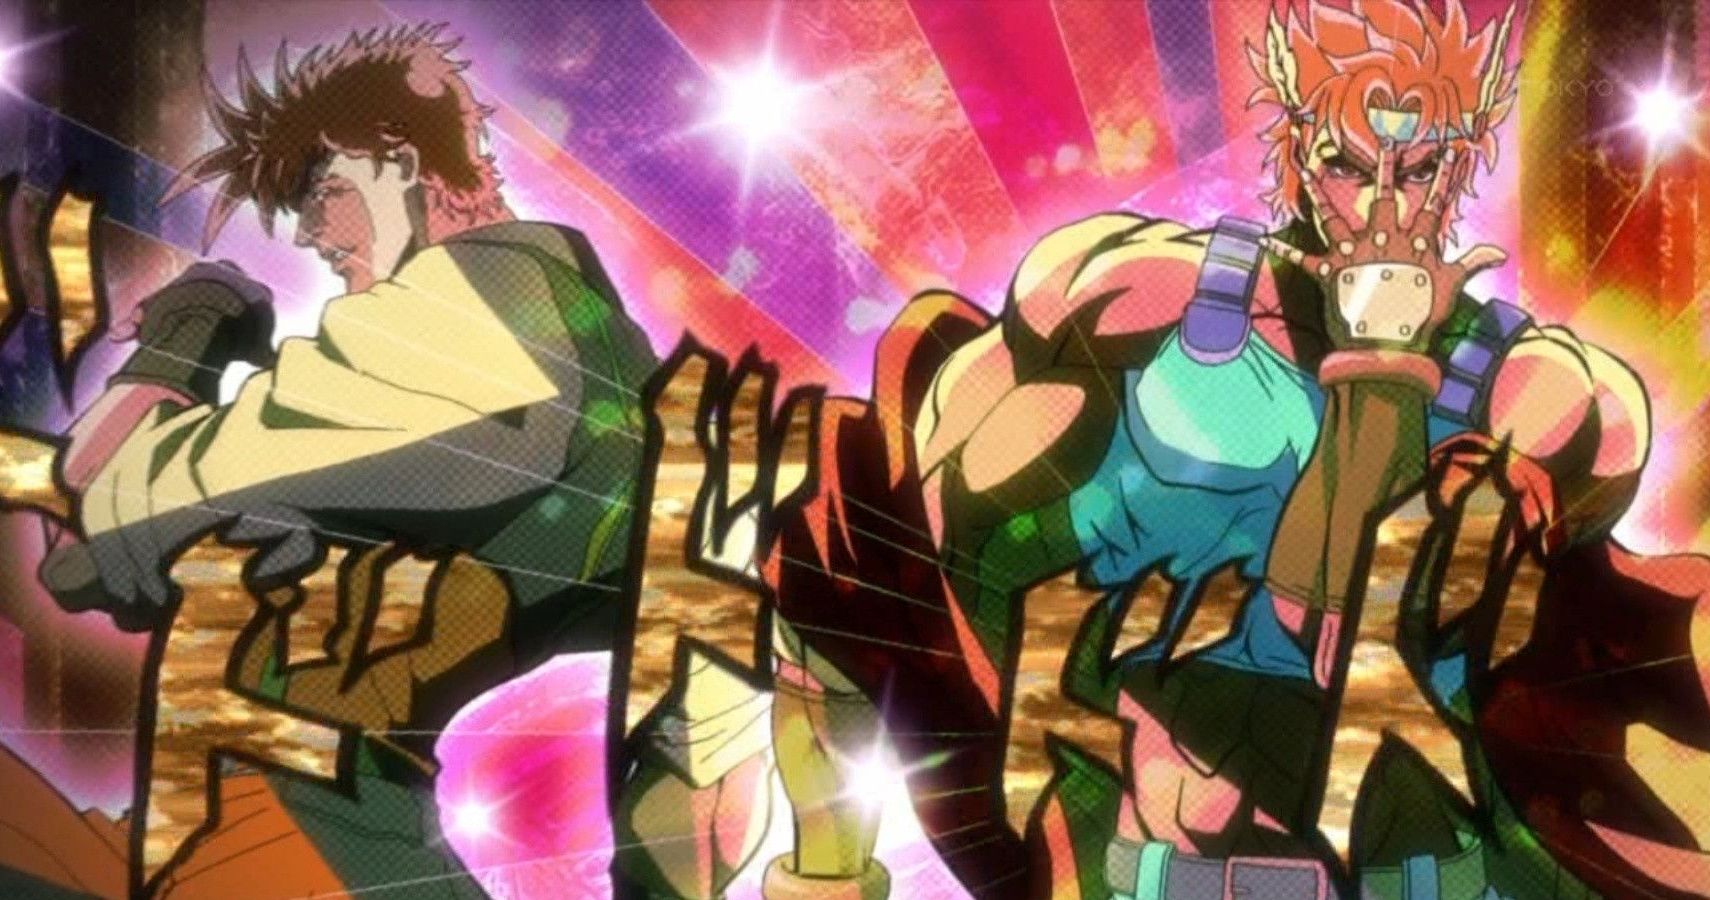 The 15 Best JoJo's Bizarre Adventure References In Other Anime